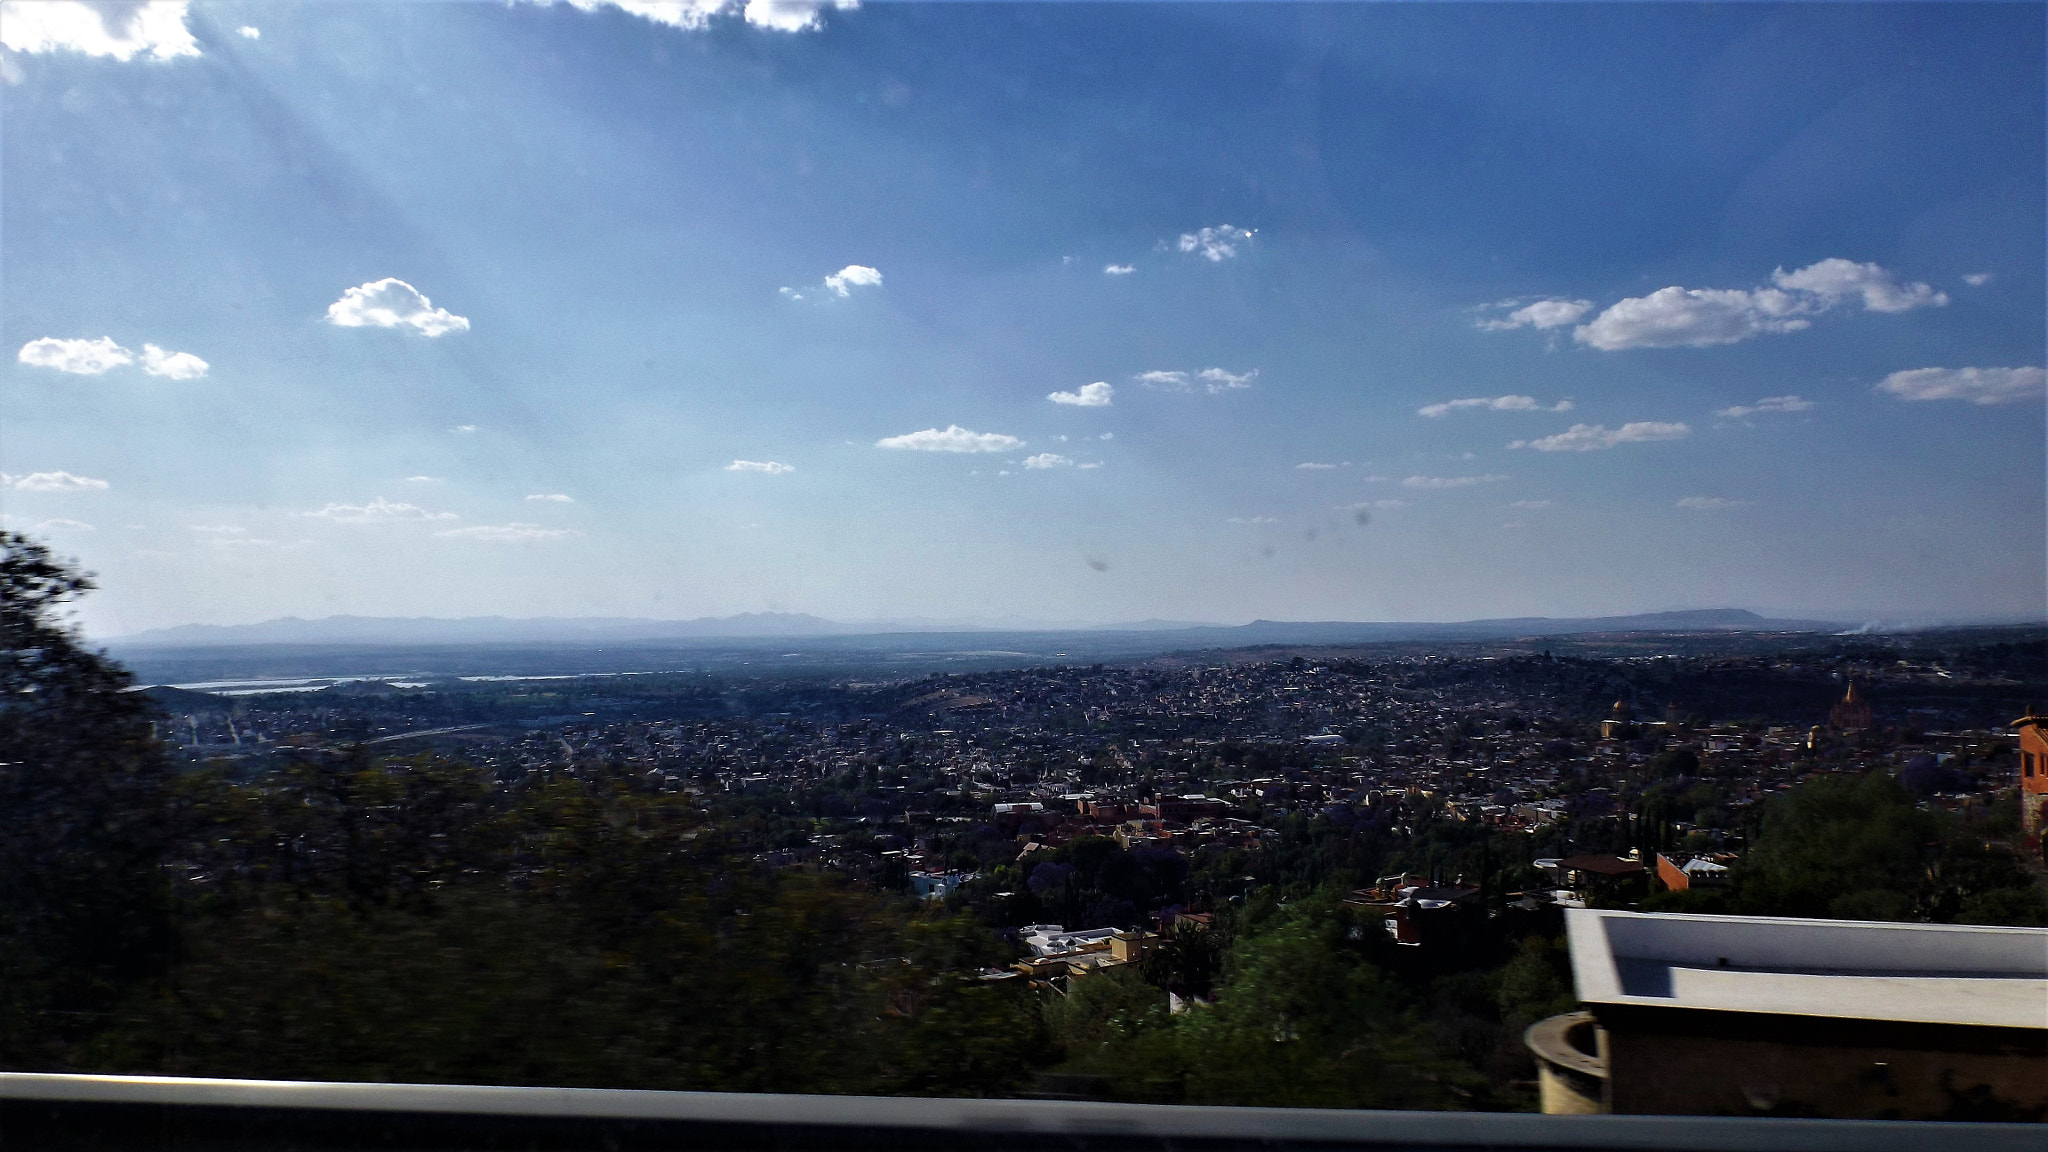 Fujifilm FinePix S4800 sample photo. San miguel de allende from the bypass road photography